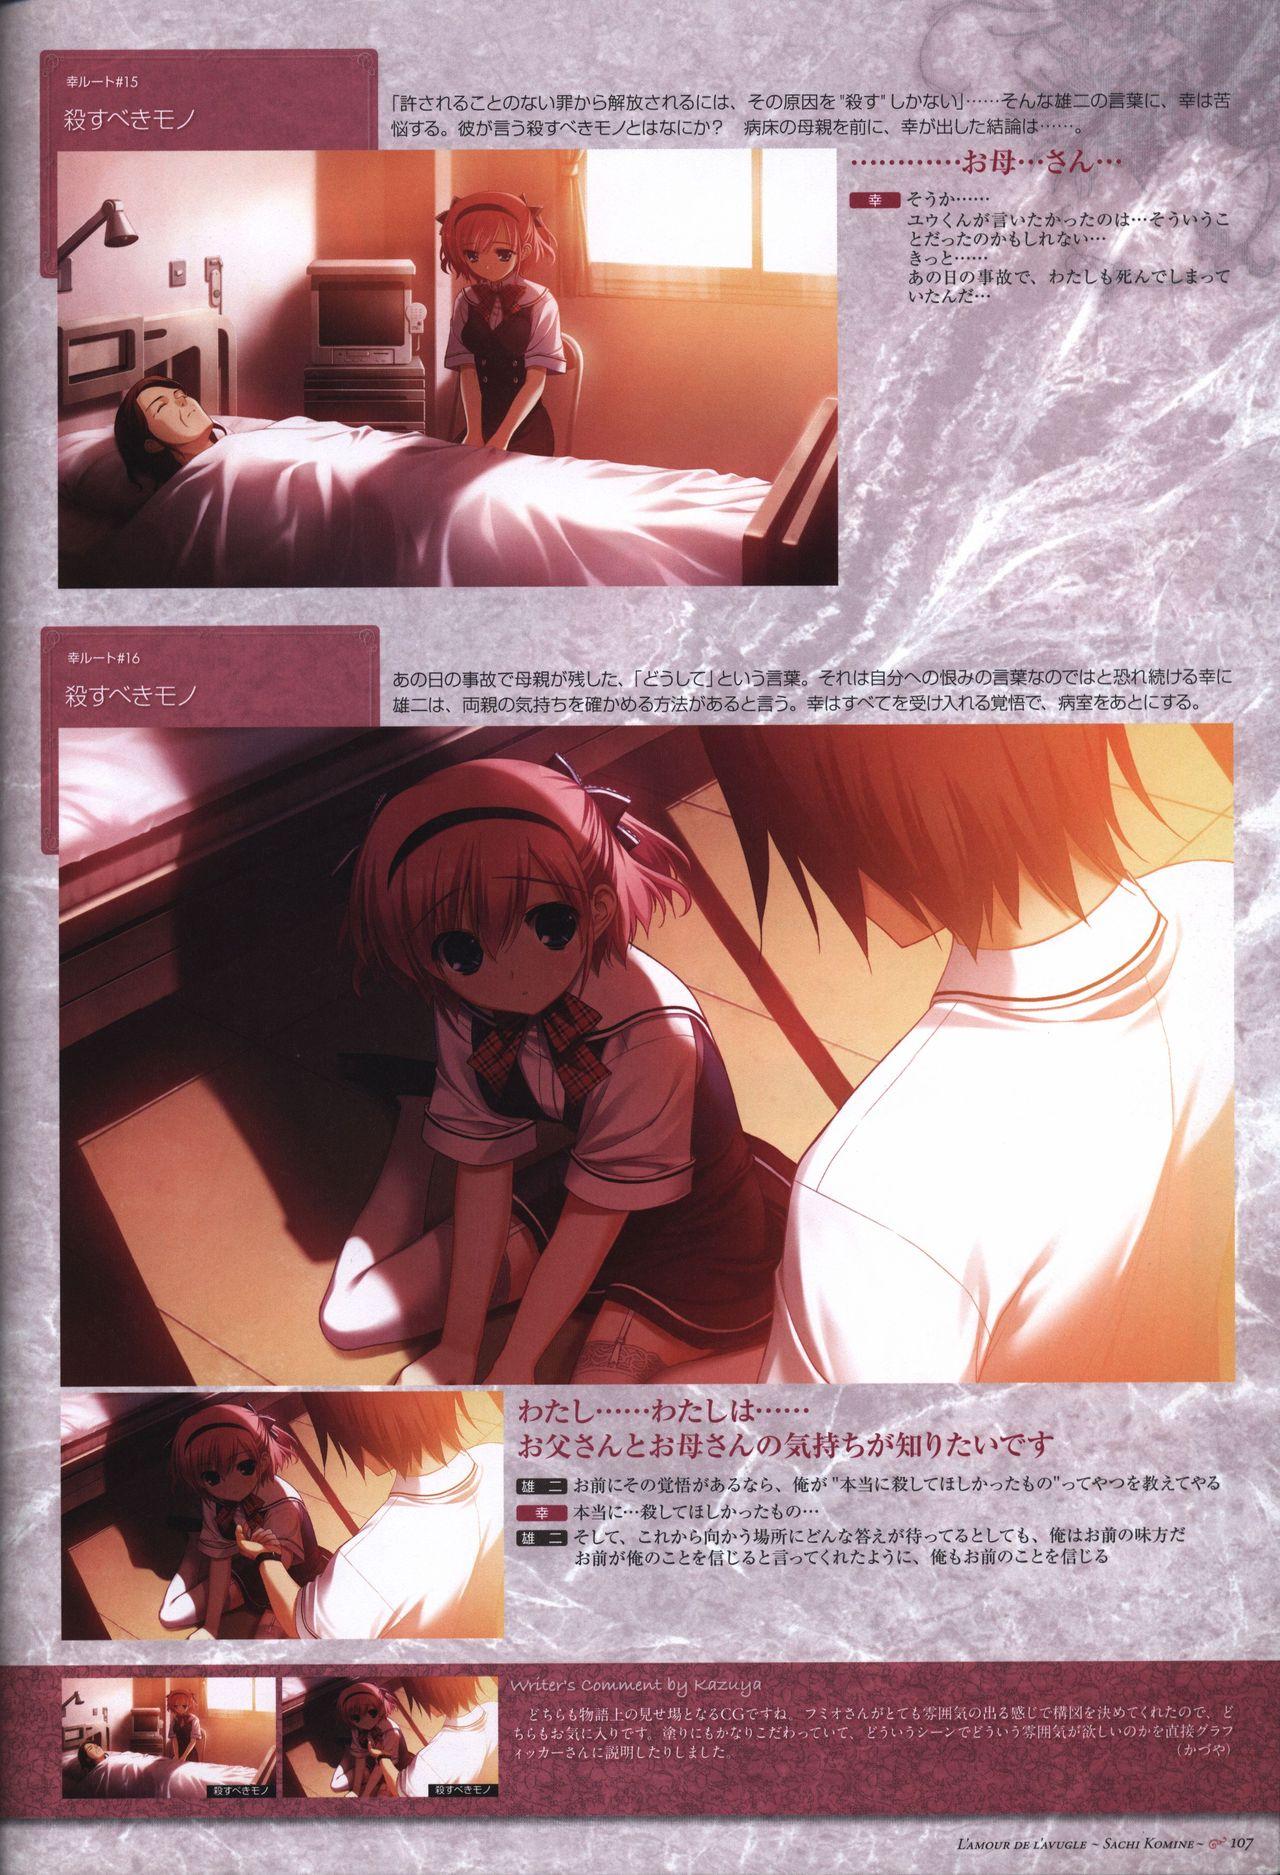 The Fruit of Grisaia Visual FanBook 107